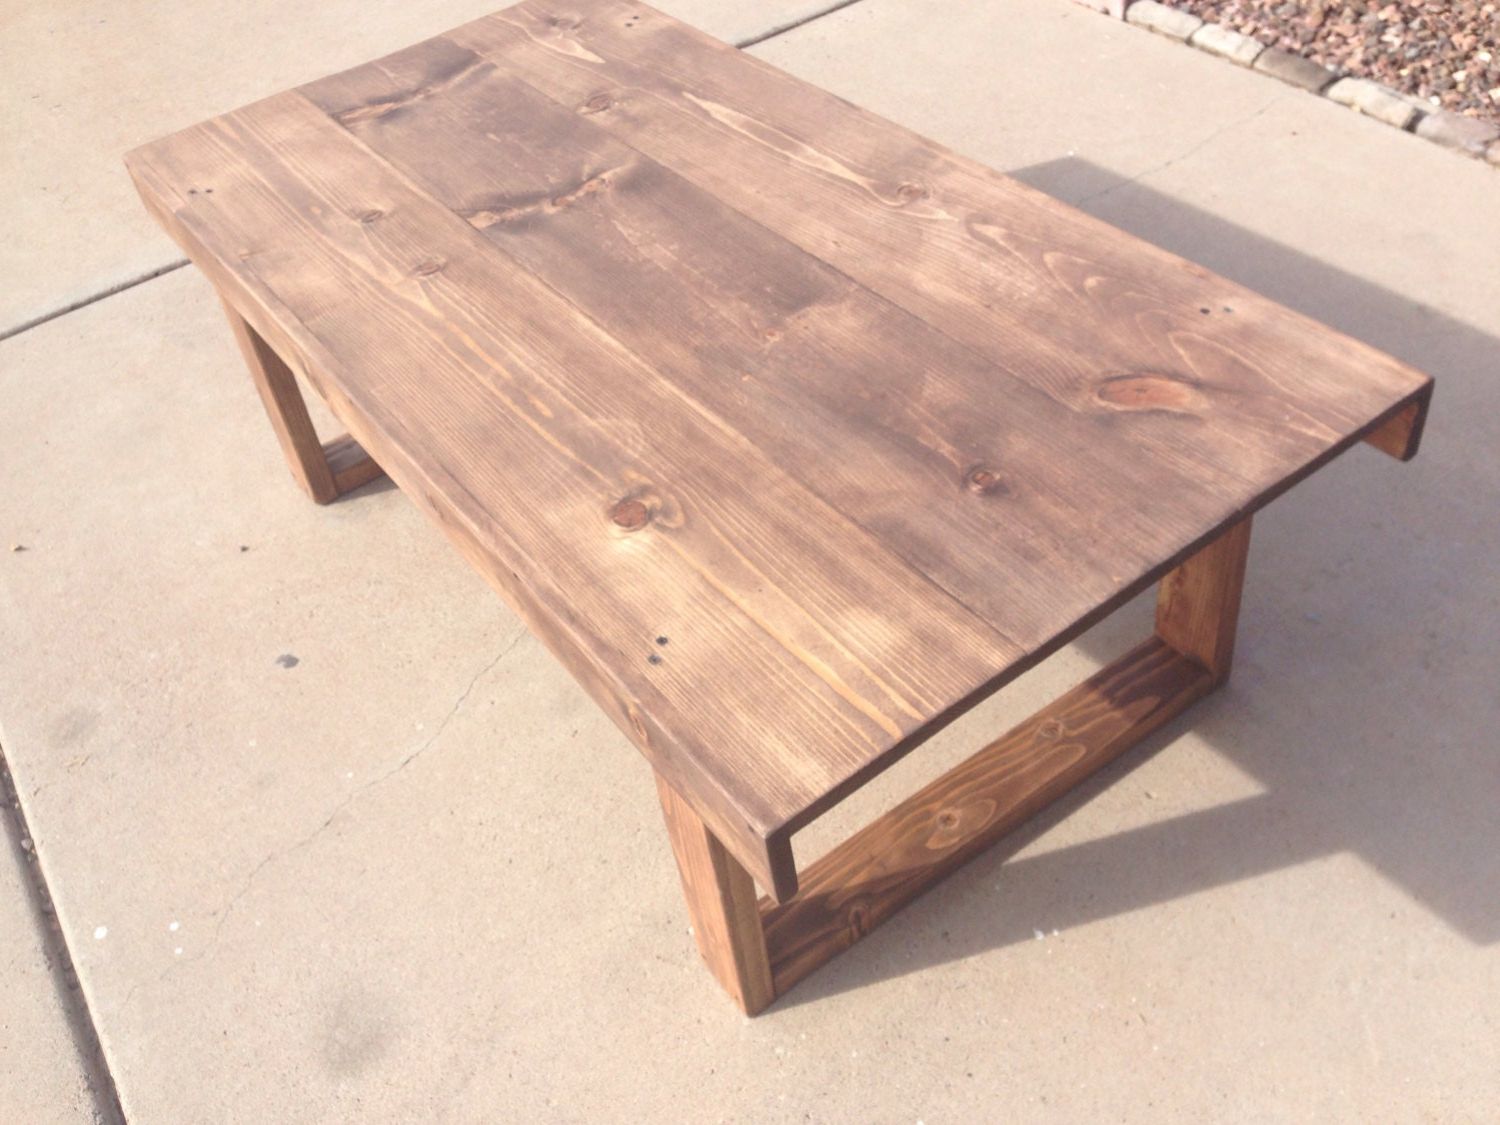 Handmade Larger Rustic Coffee Table In Walnut Throughout Well Known Rustic Walnut Wood Coffee Tables (View 10 of 20)